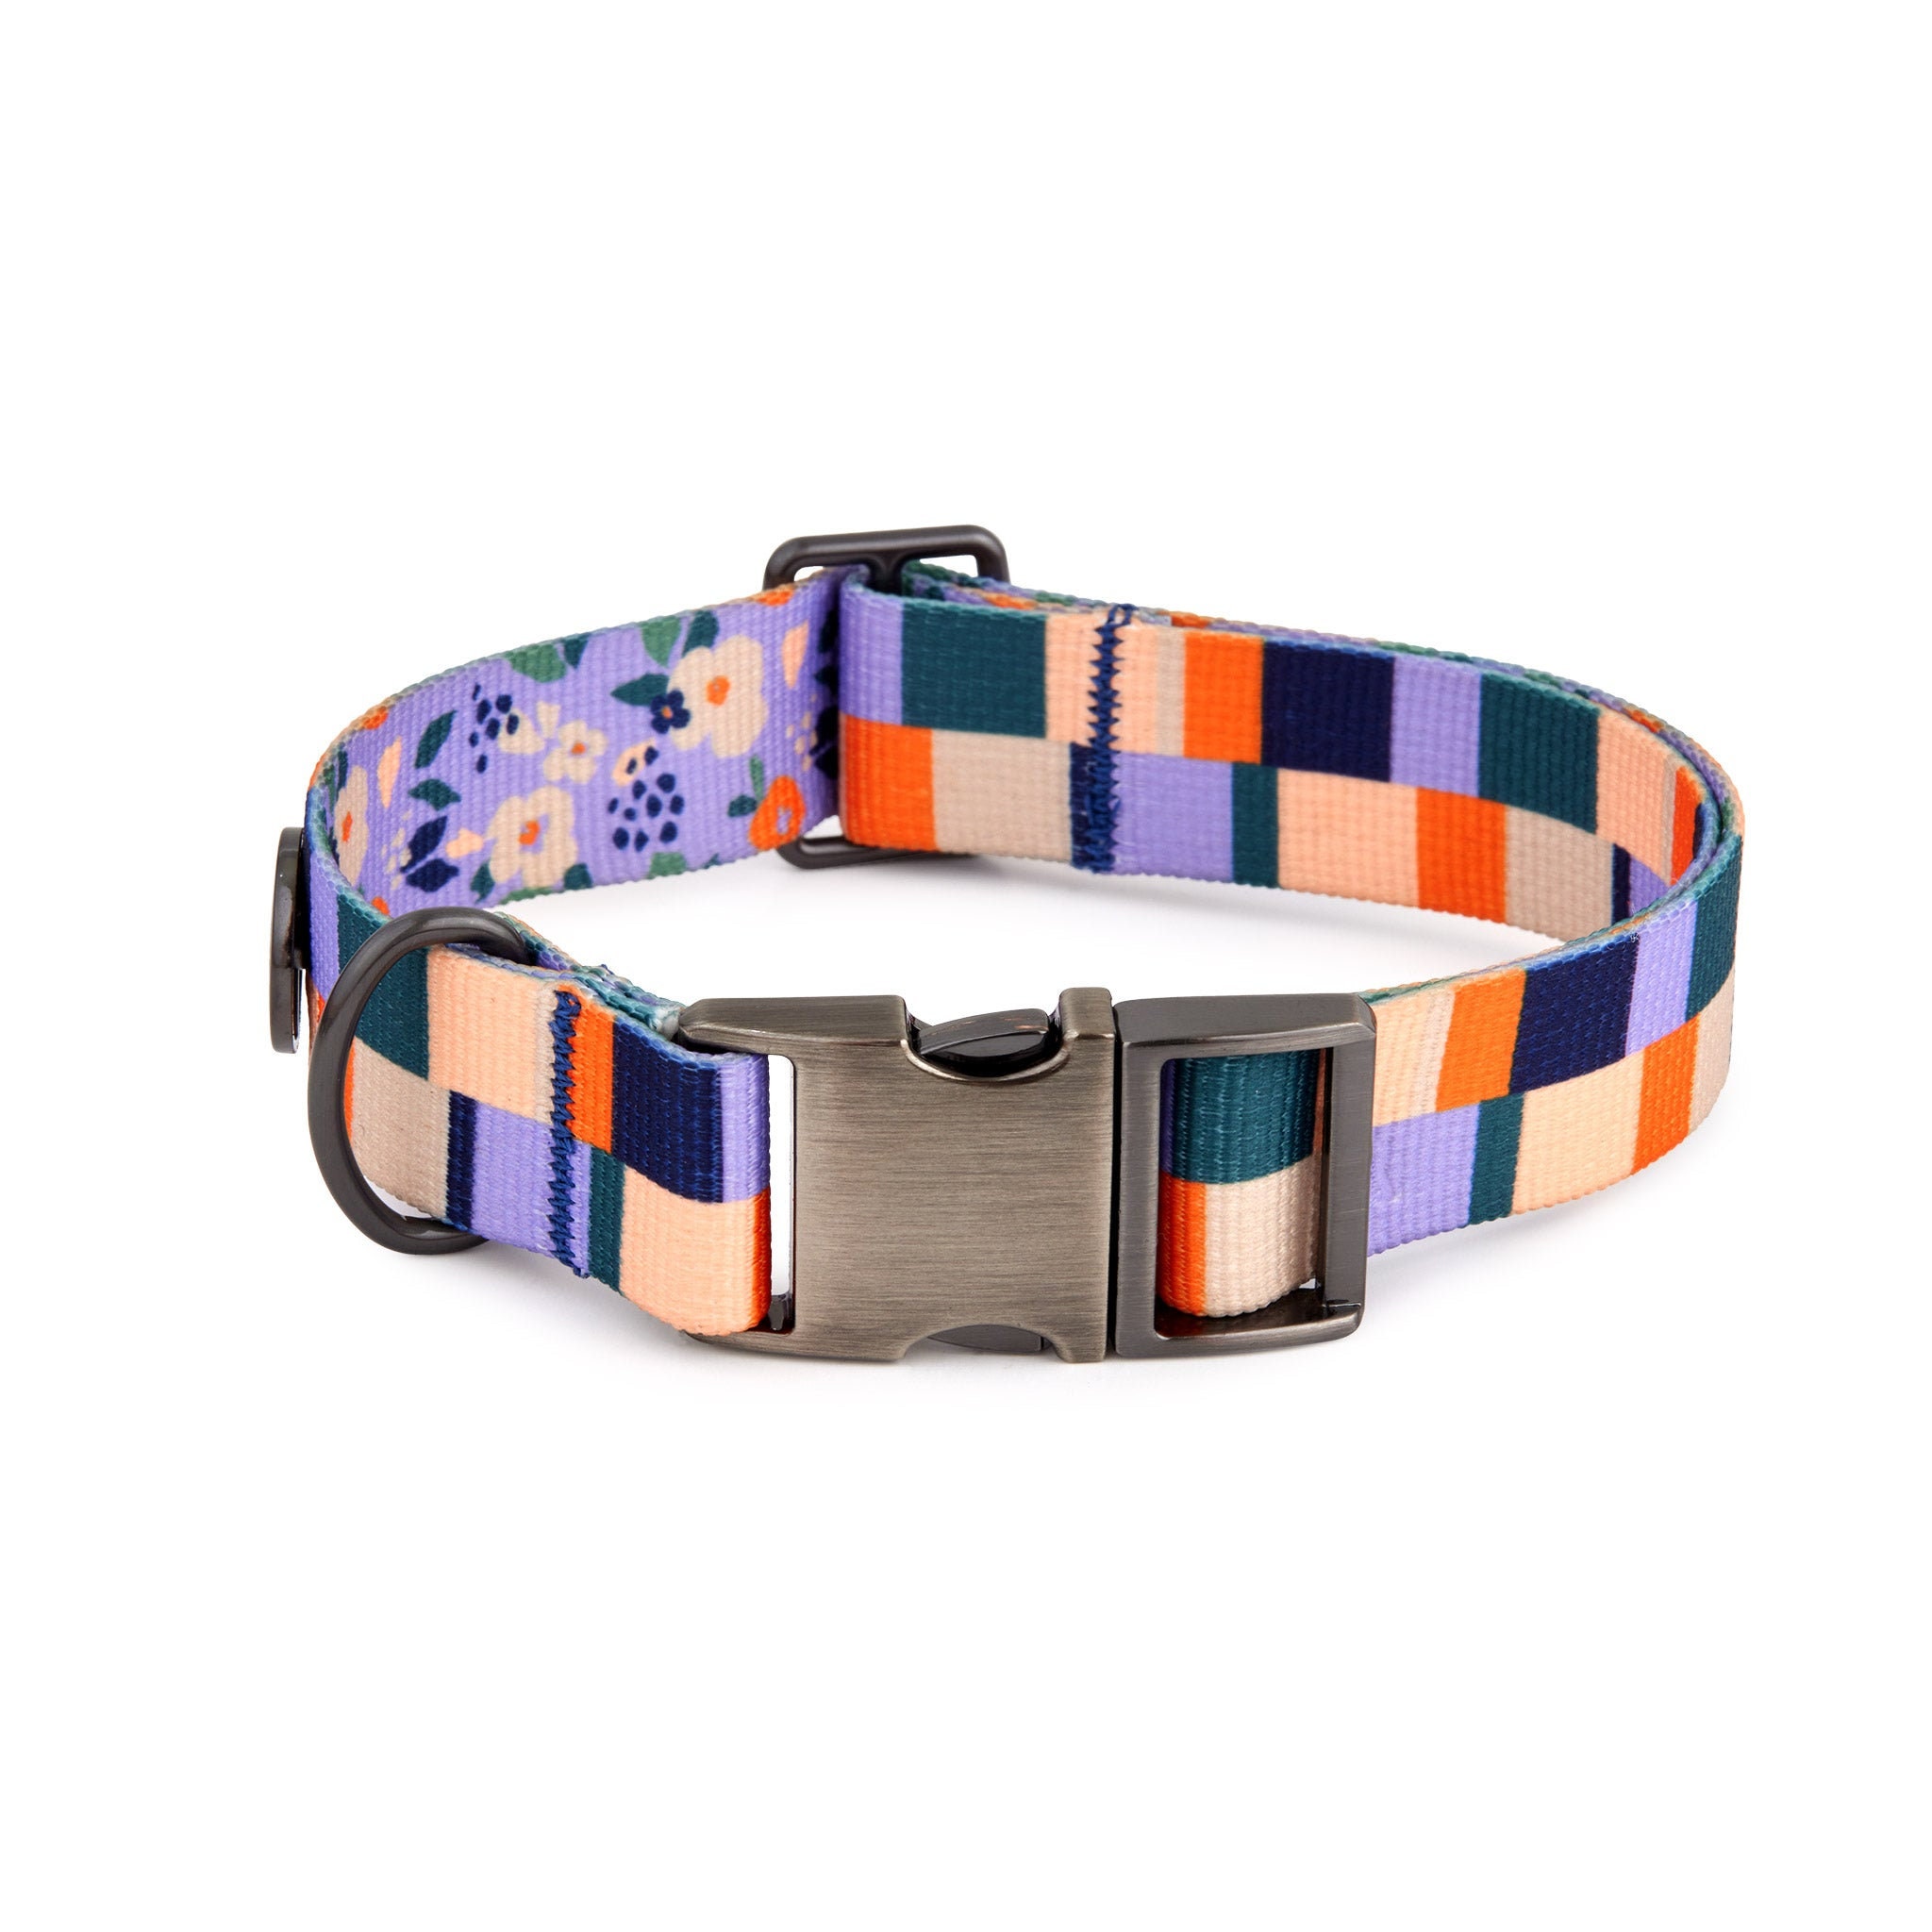 Eco Friendly Dog Collar BFF Made from Recycled Plastic – Doggy Eco